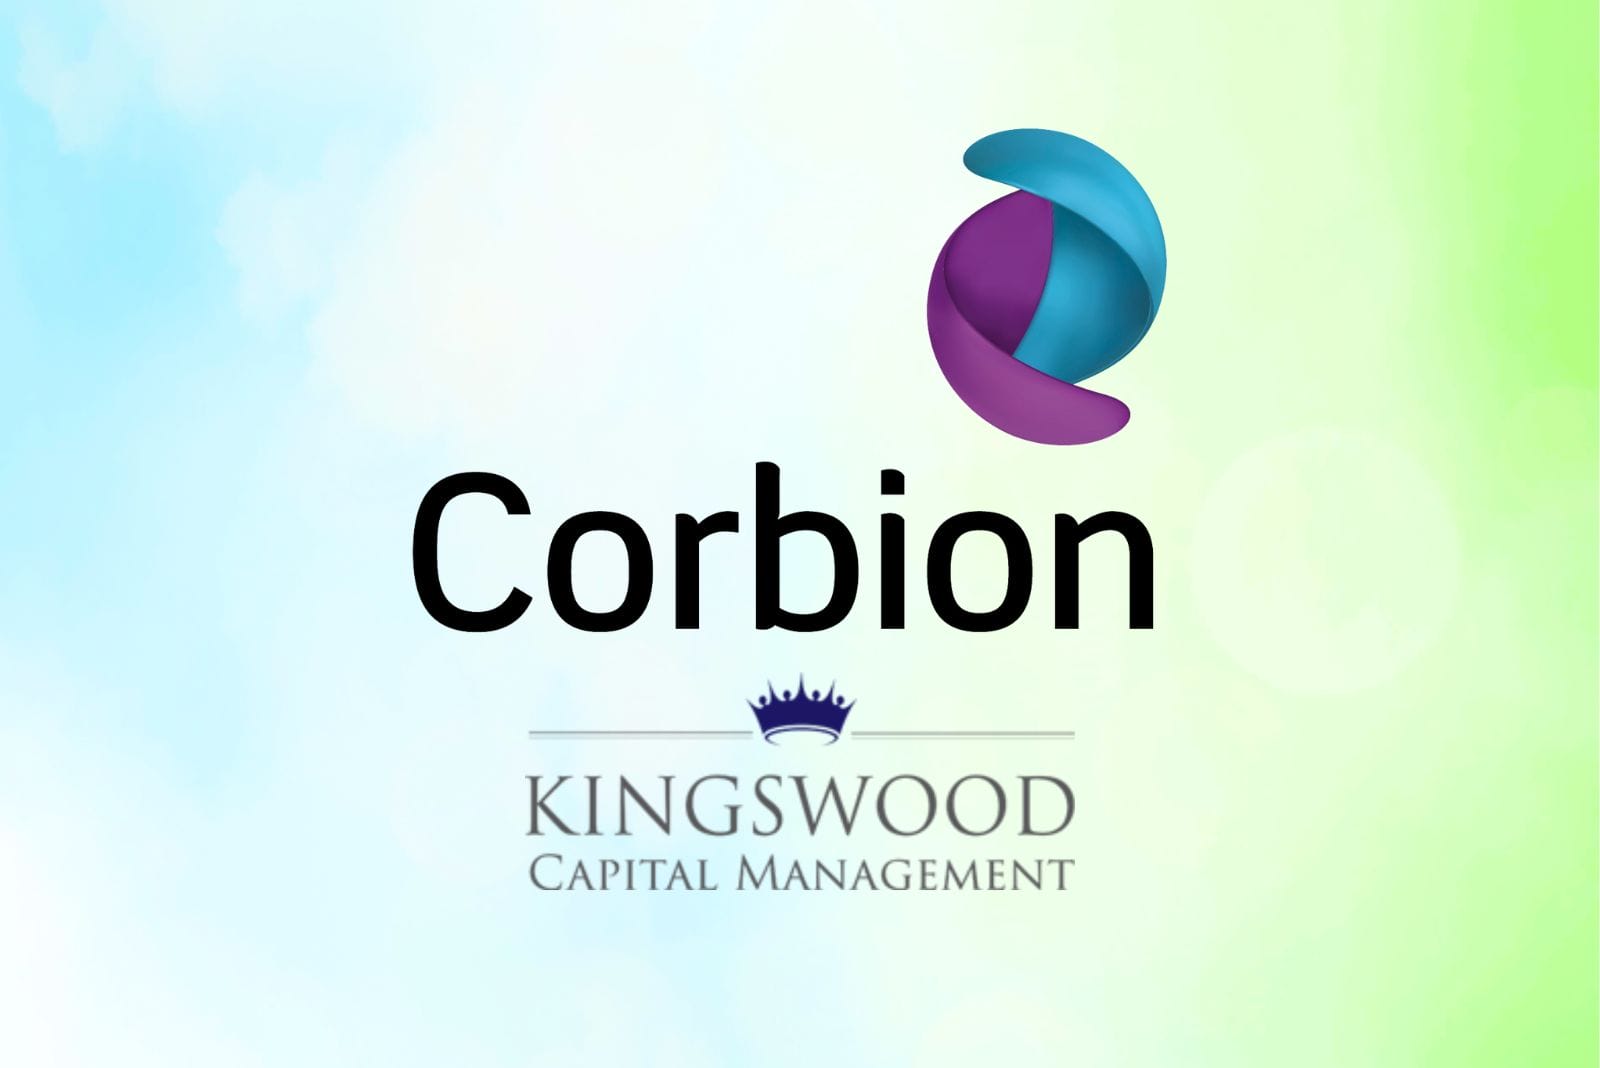 corbion and kingswood capital management logos